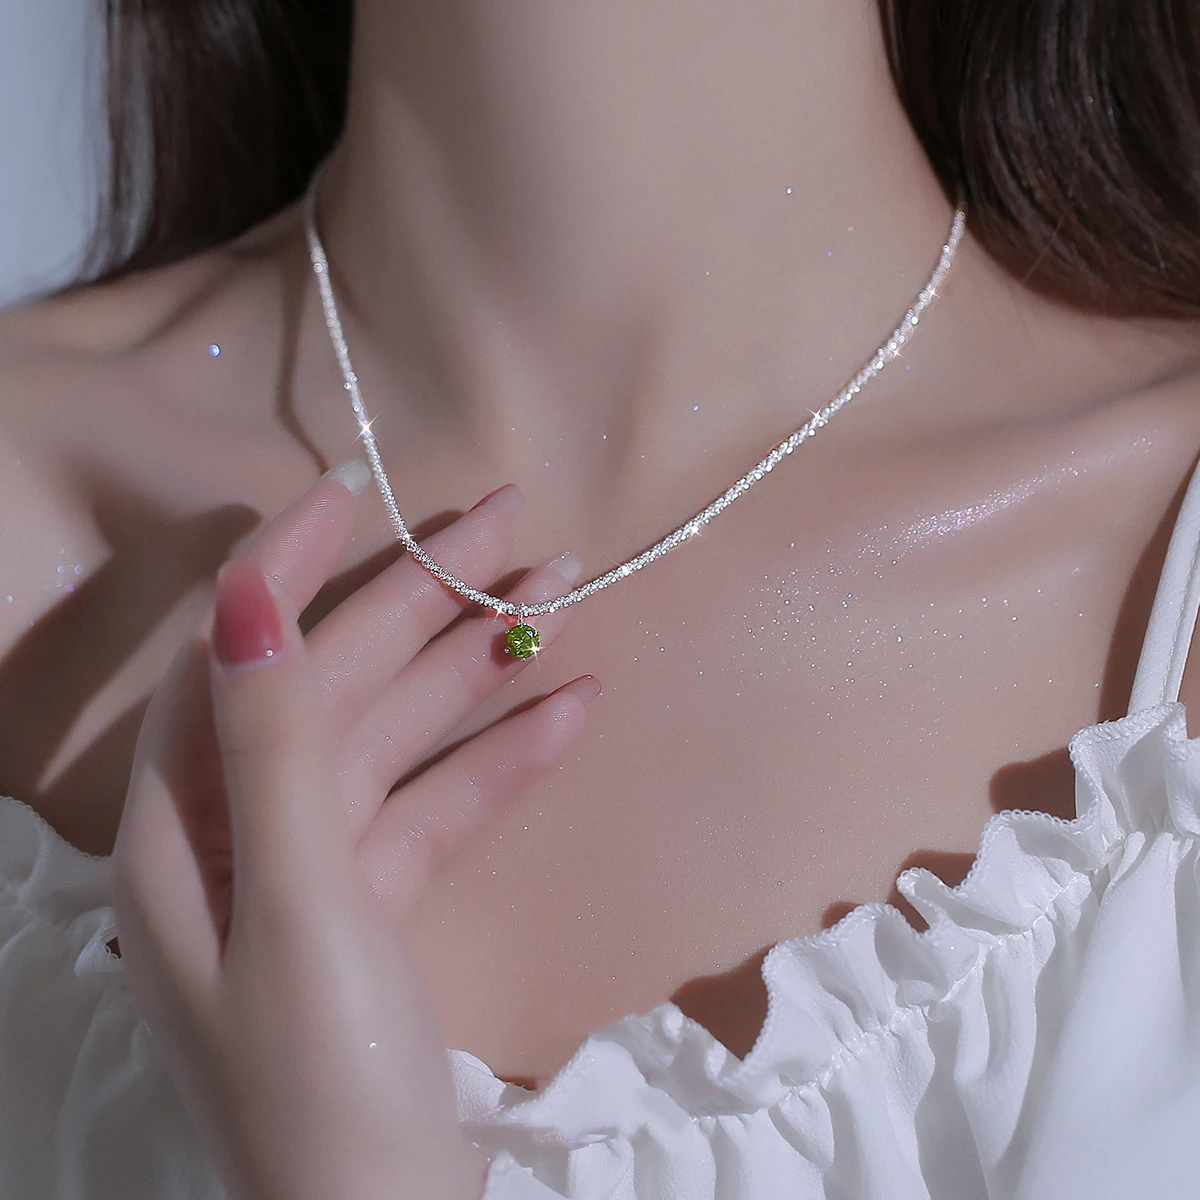 

Vintage Silver Necklace Sparkling Clavicle Chain Green Diamond Gypsophila Pendant Necklaces for Women's Girls Wedding Jewelry